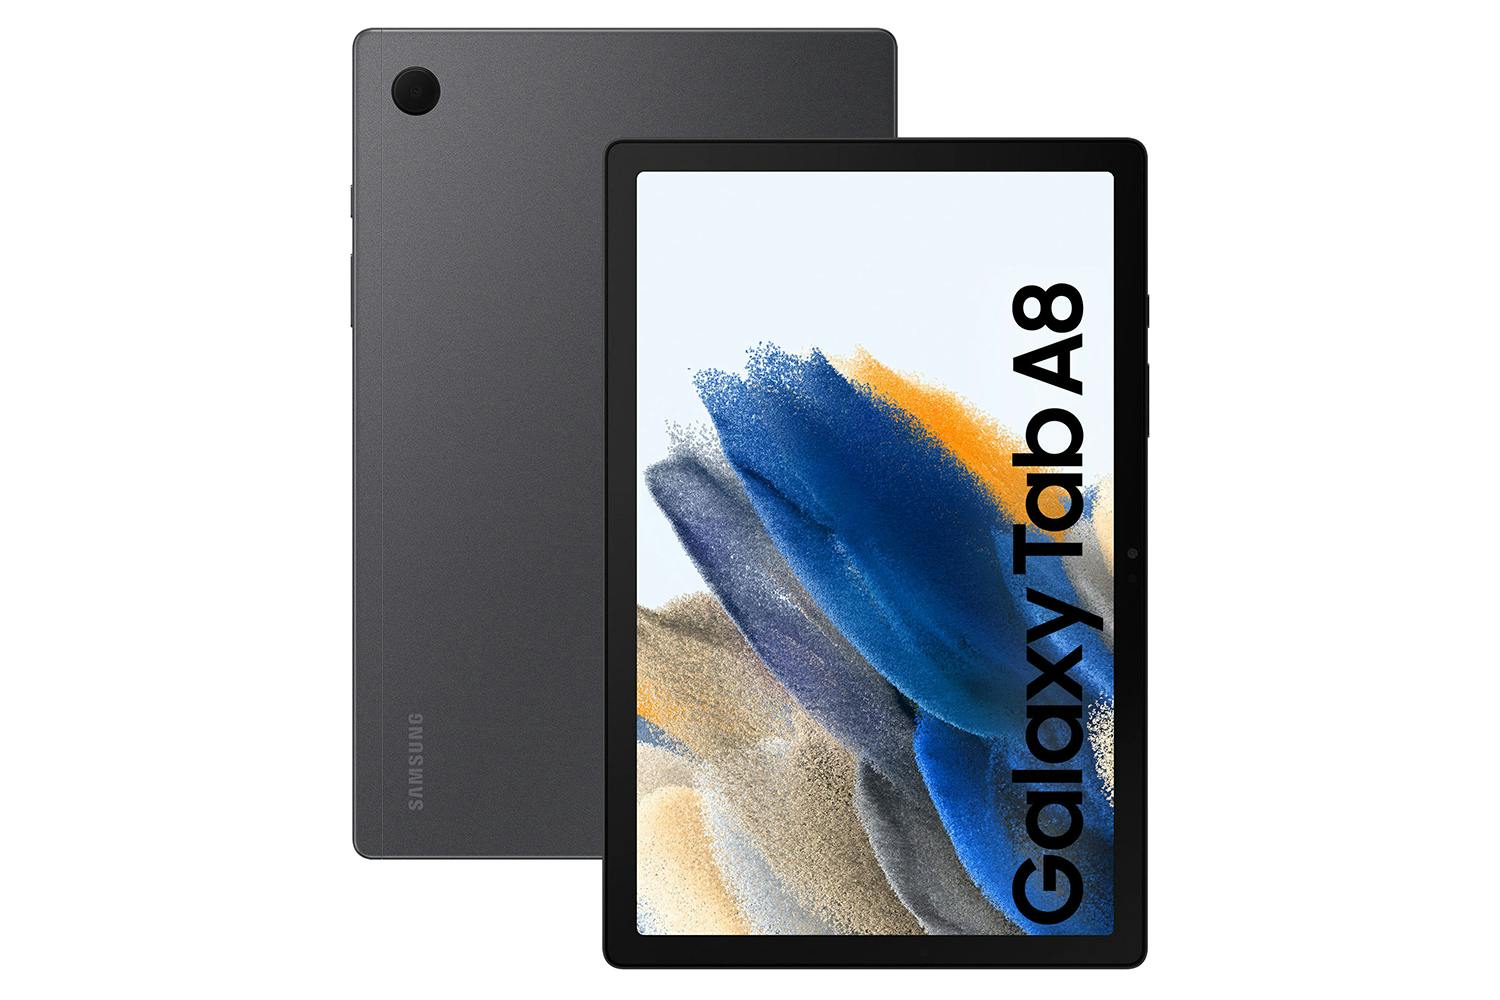 Comparer Tablet Samsung Galaxy Tab S 10.5 4G - Moviles.com France